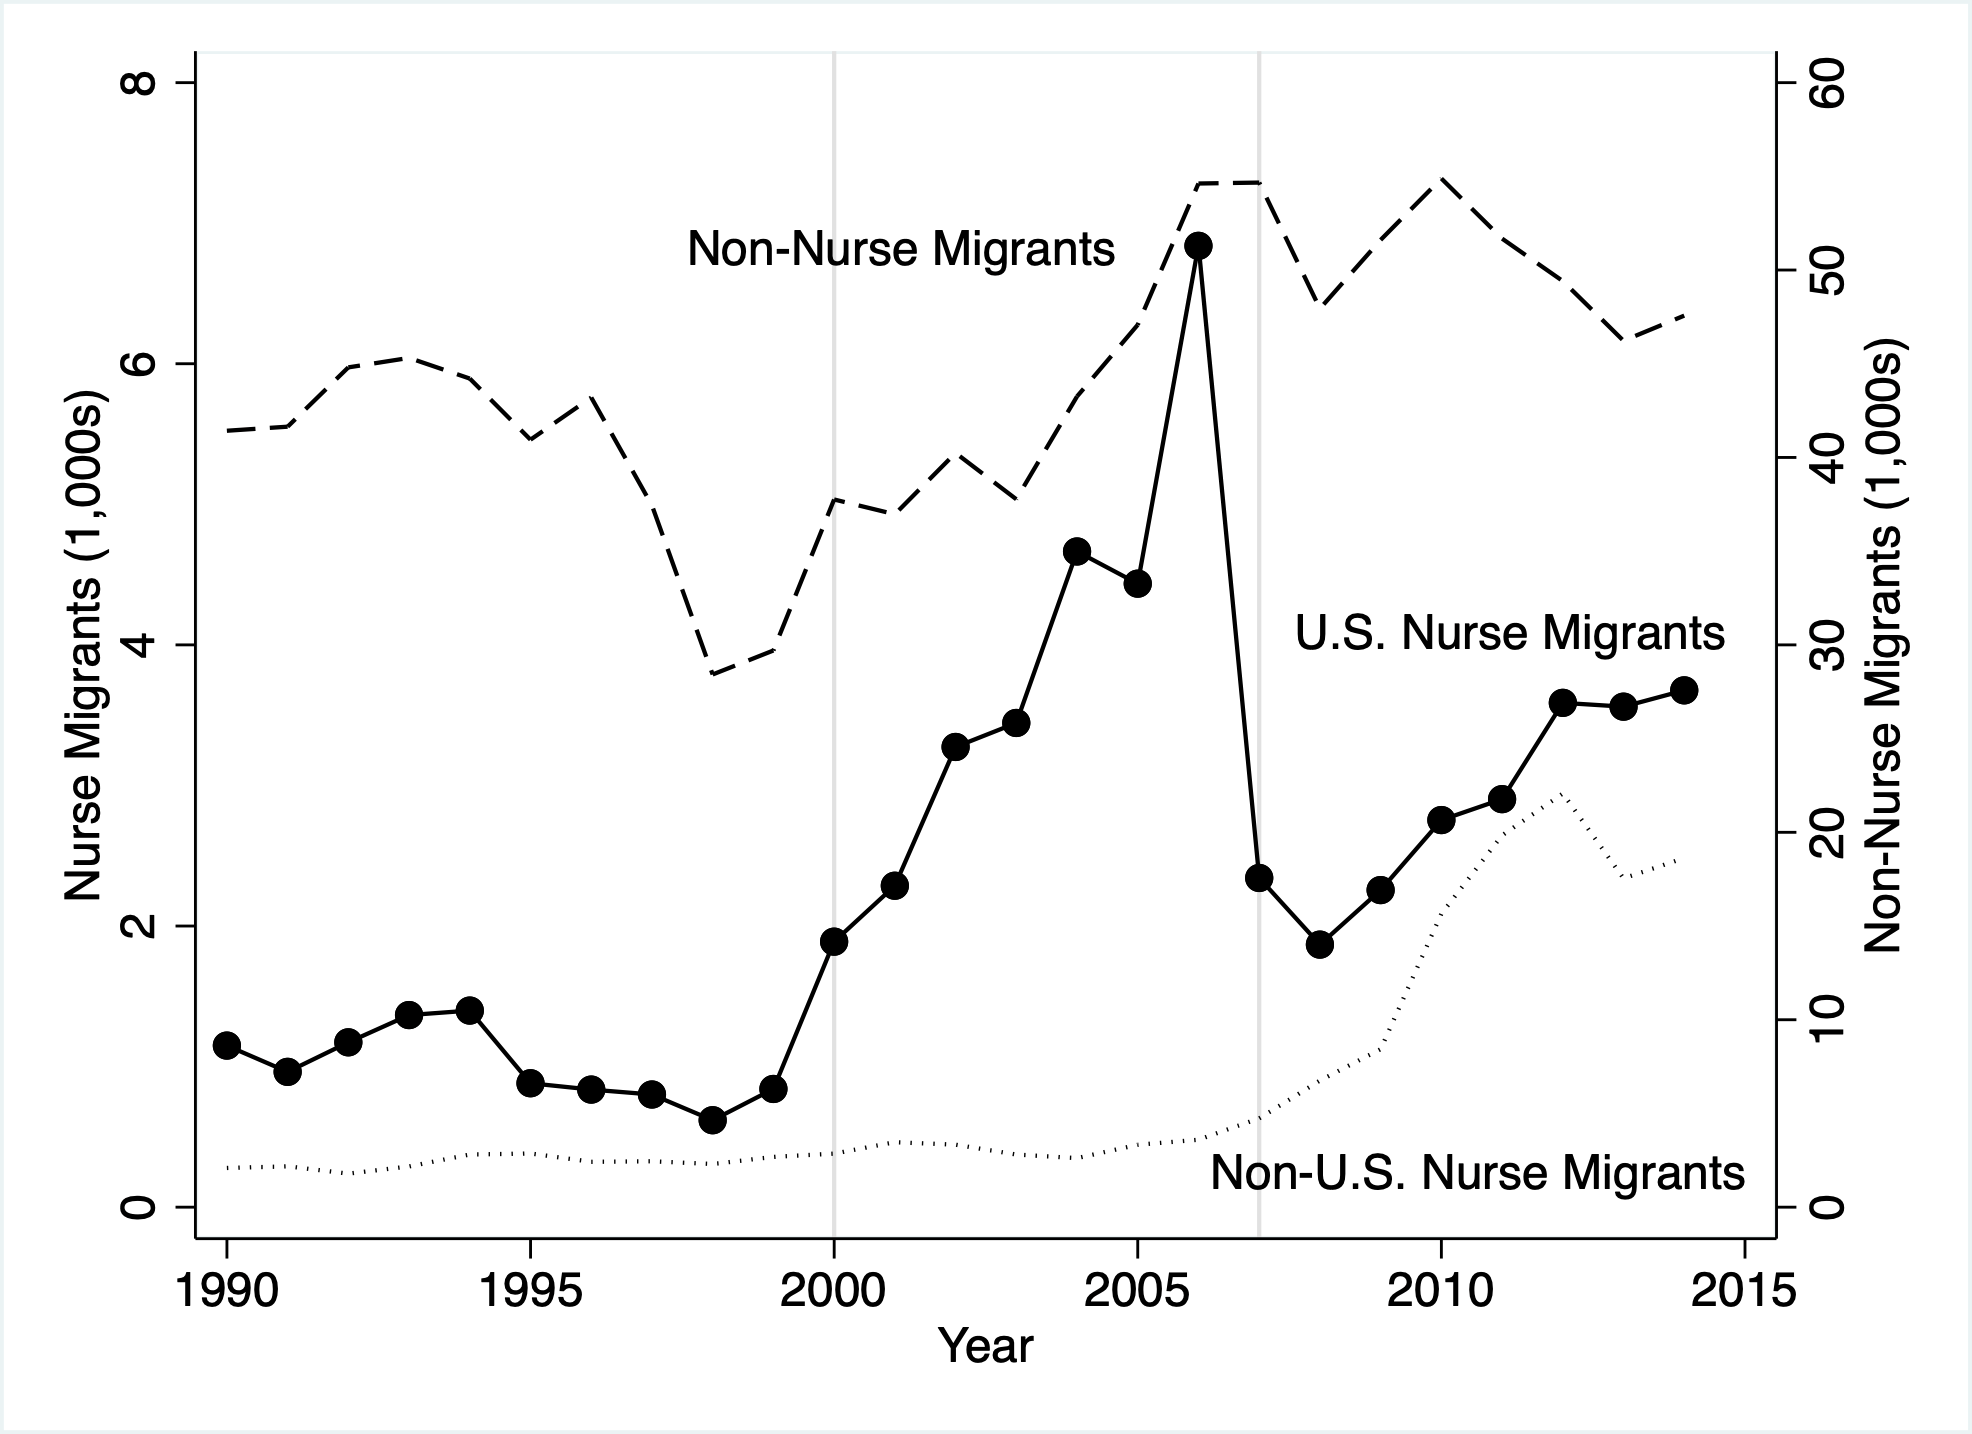 Figure 1. Number of Nurse and Non-Nurse Migrants from the Philippines.